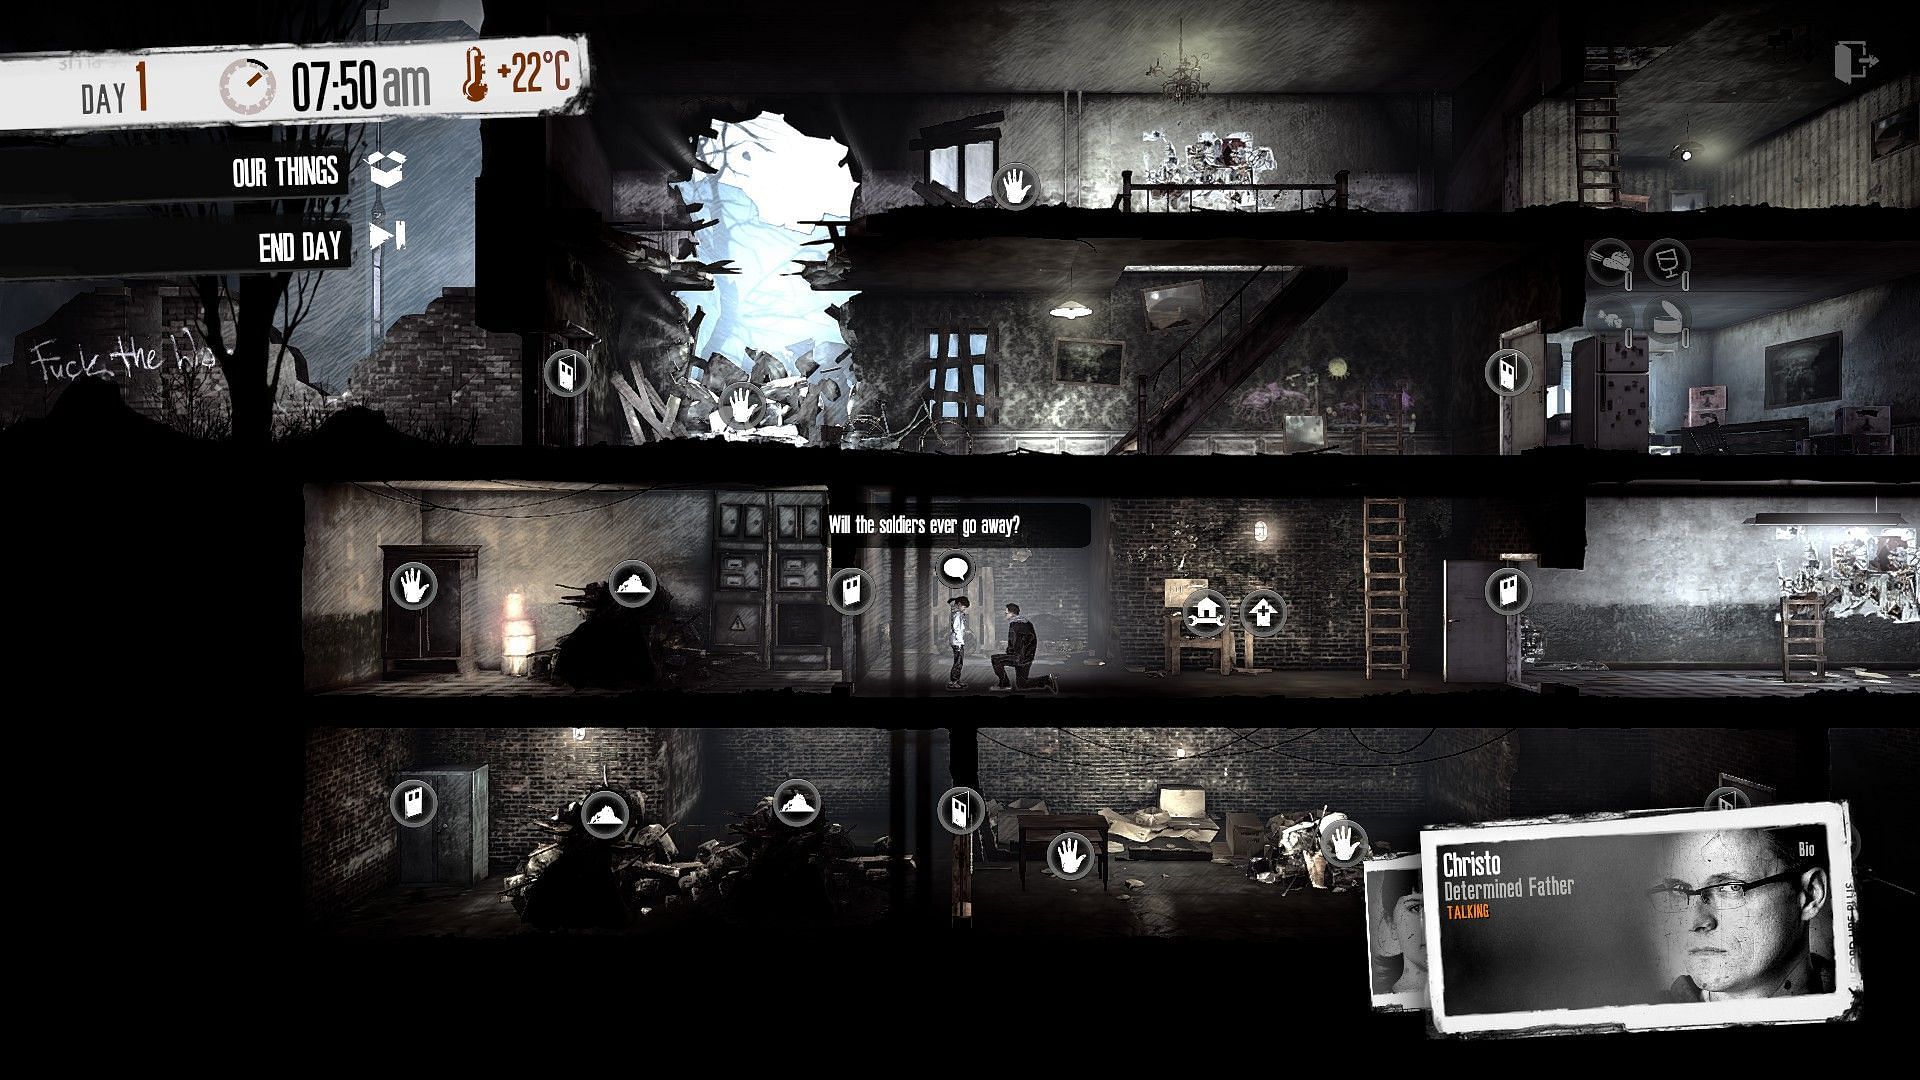 Will the soldiers go away? (Image via This War of Mine)